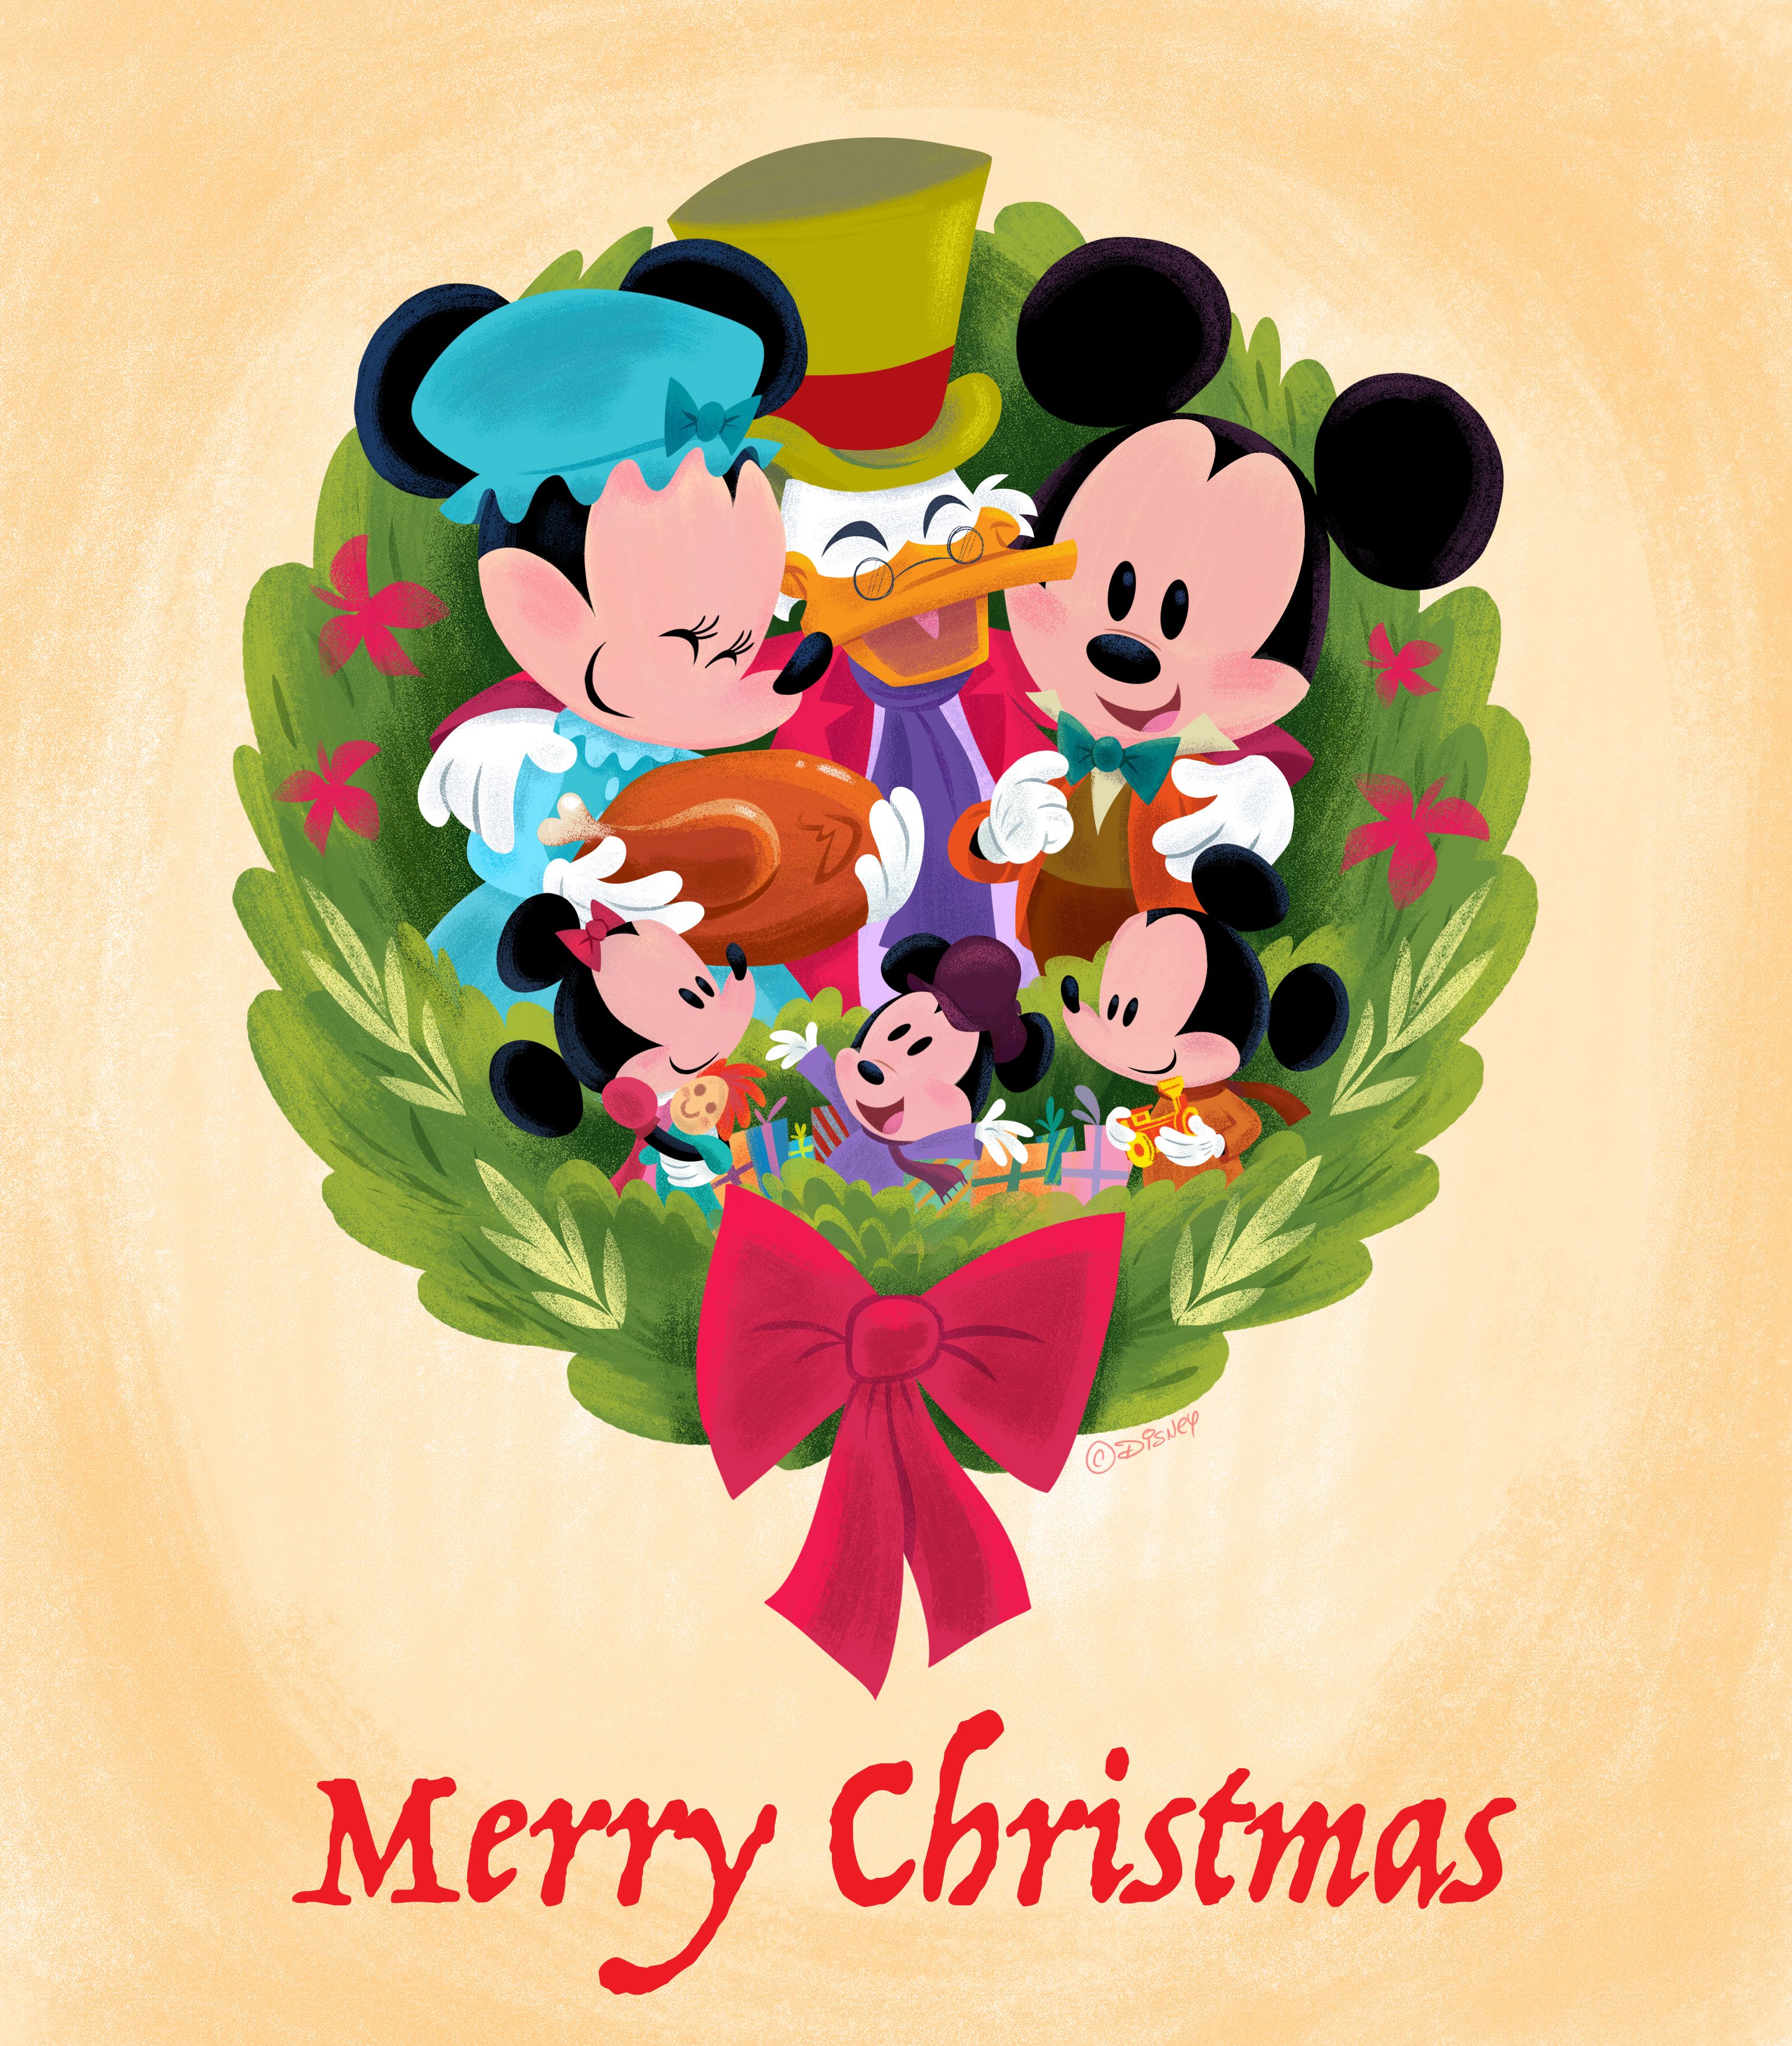 Download These Special Holiday Wallpaper Designed by Disney Artists Now